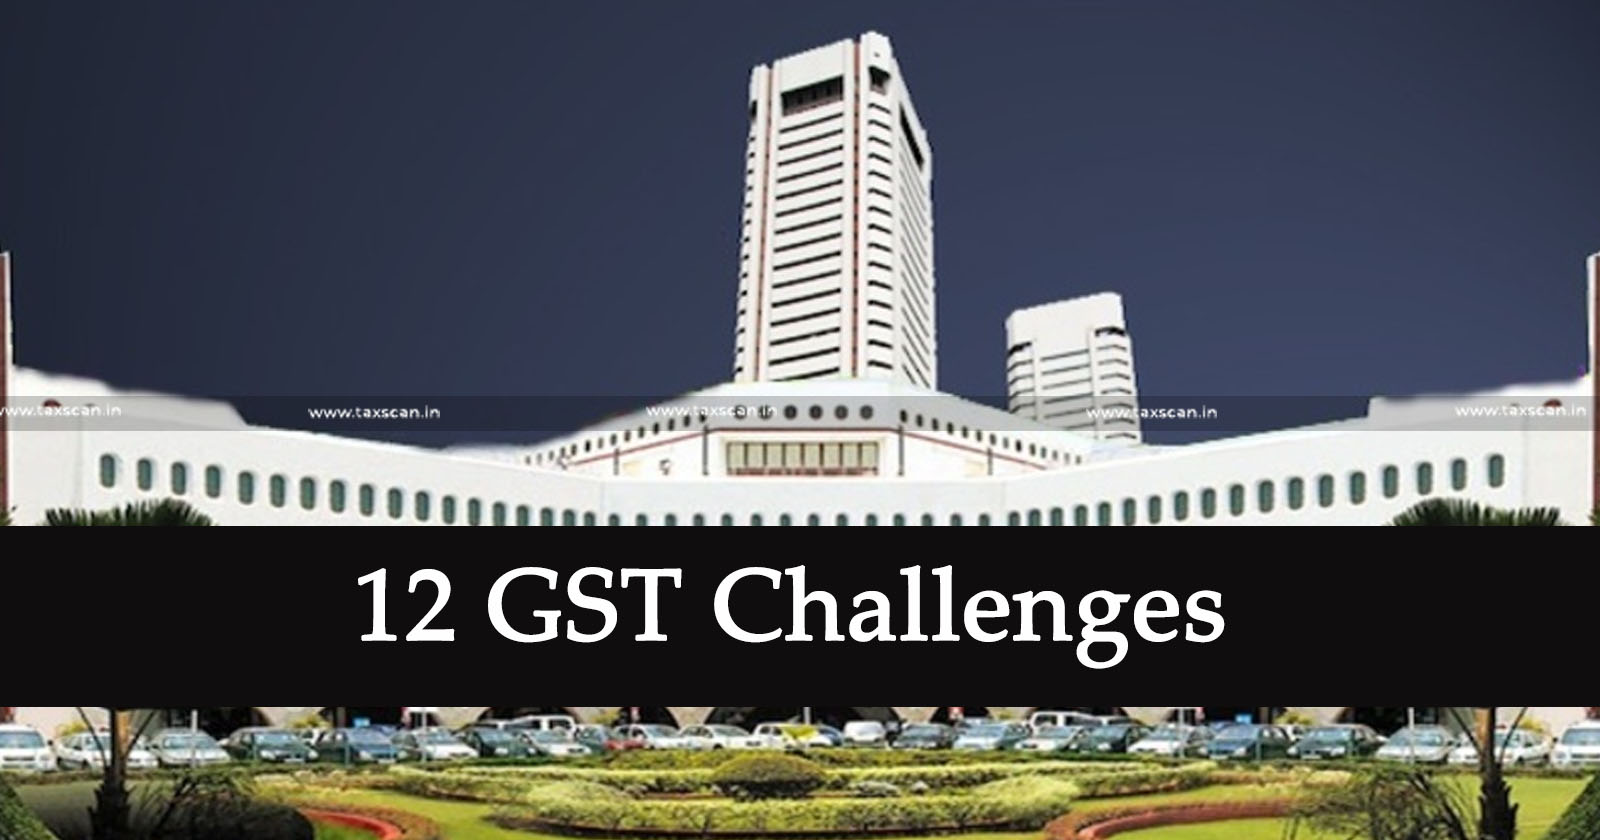 World Trade Center Mumbai - GST Challenges - Trade and Industry - CBIC - taxscan